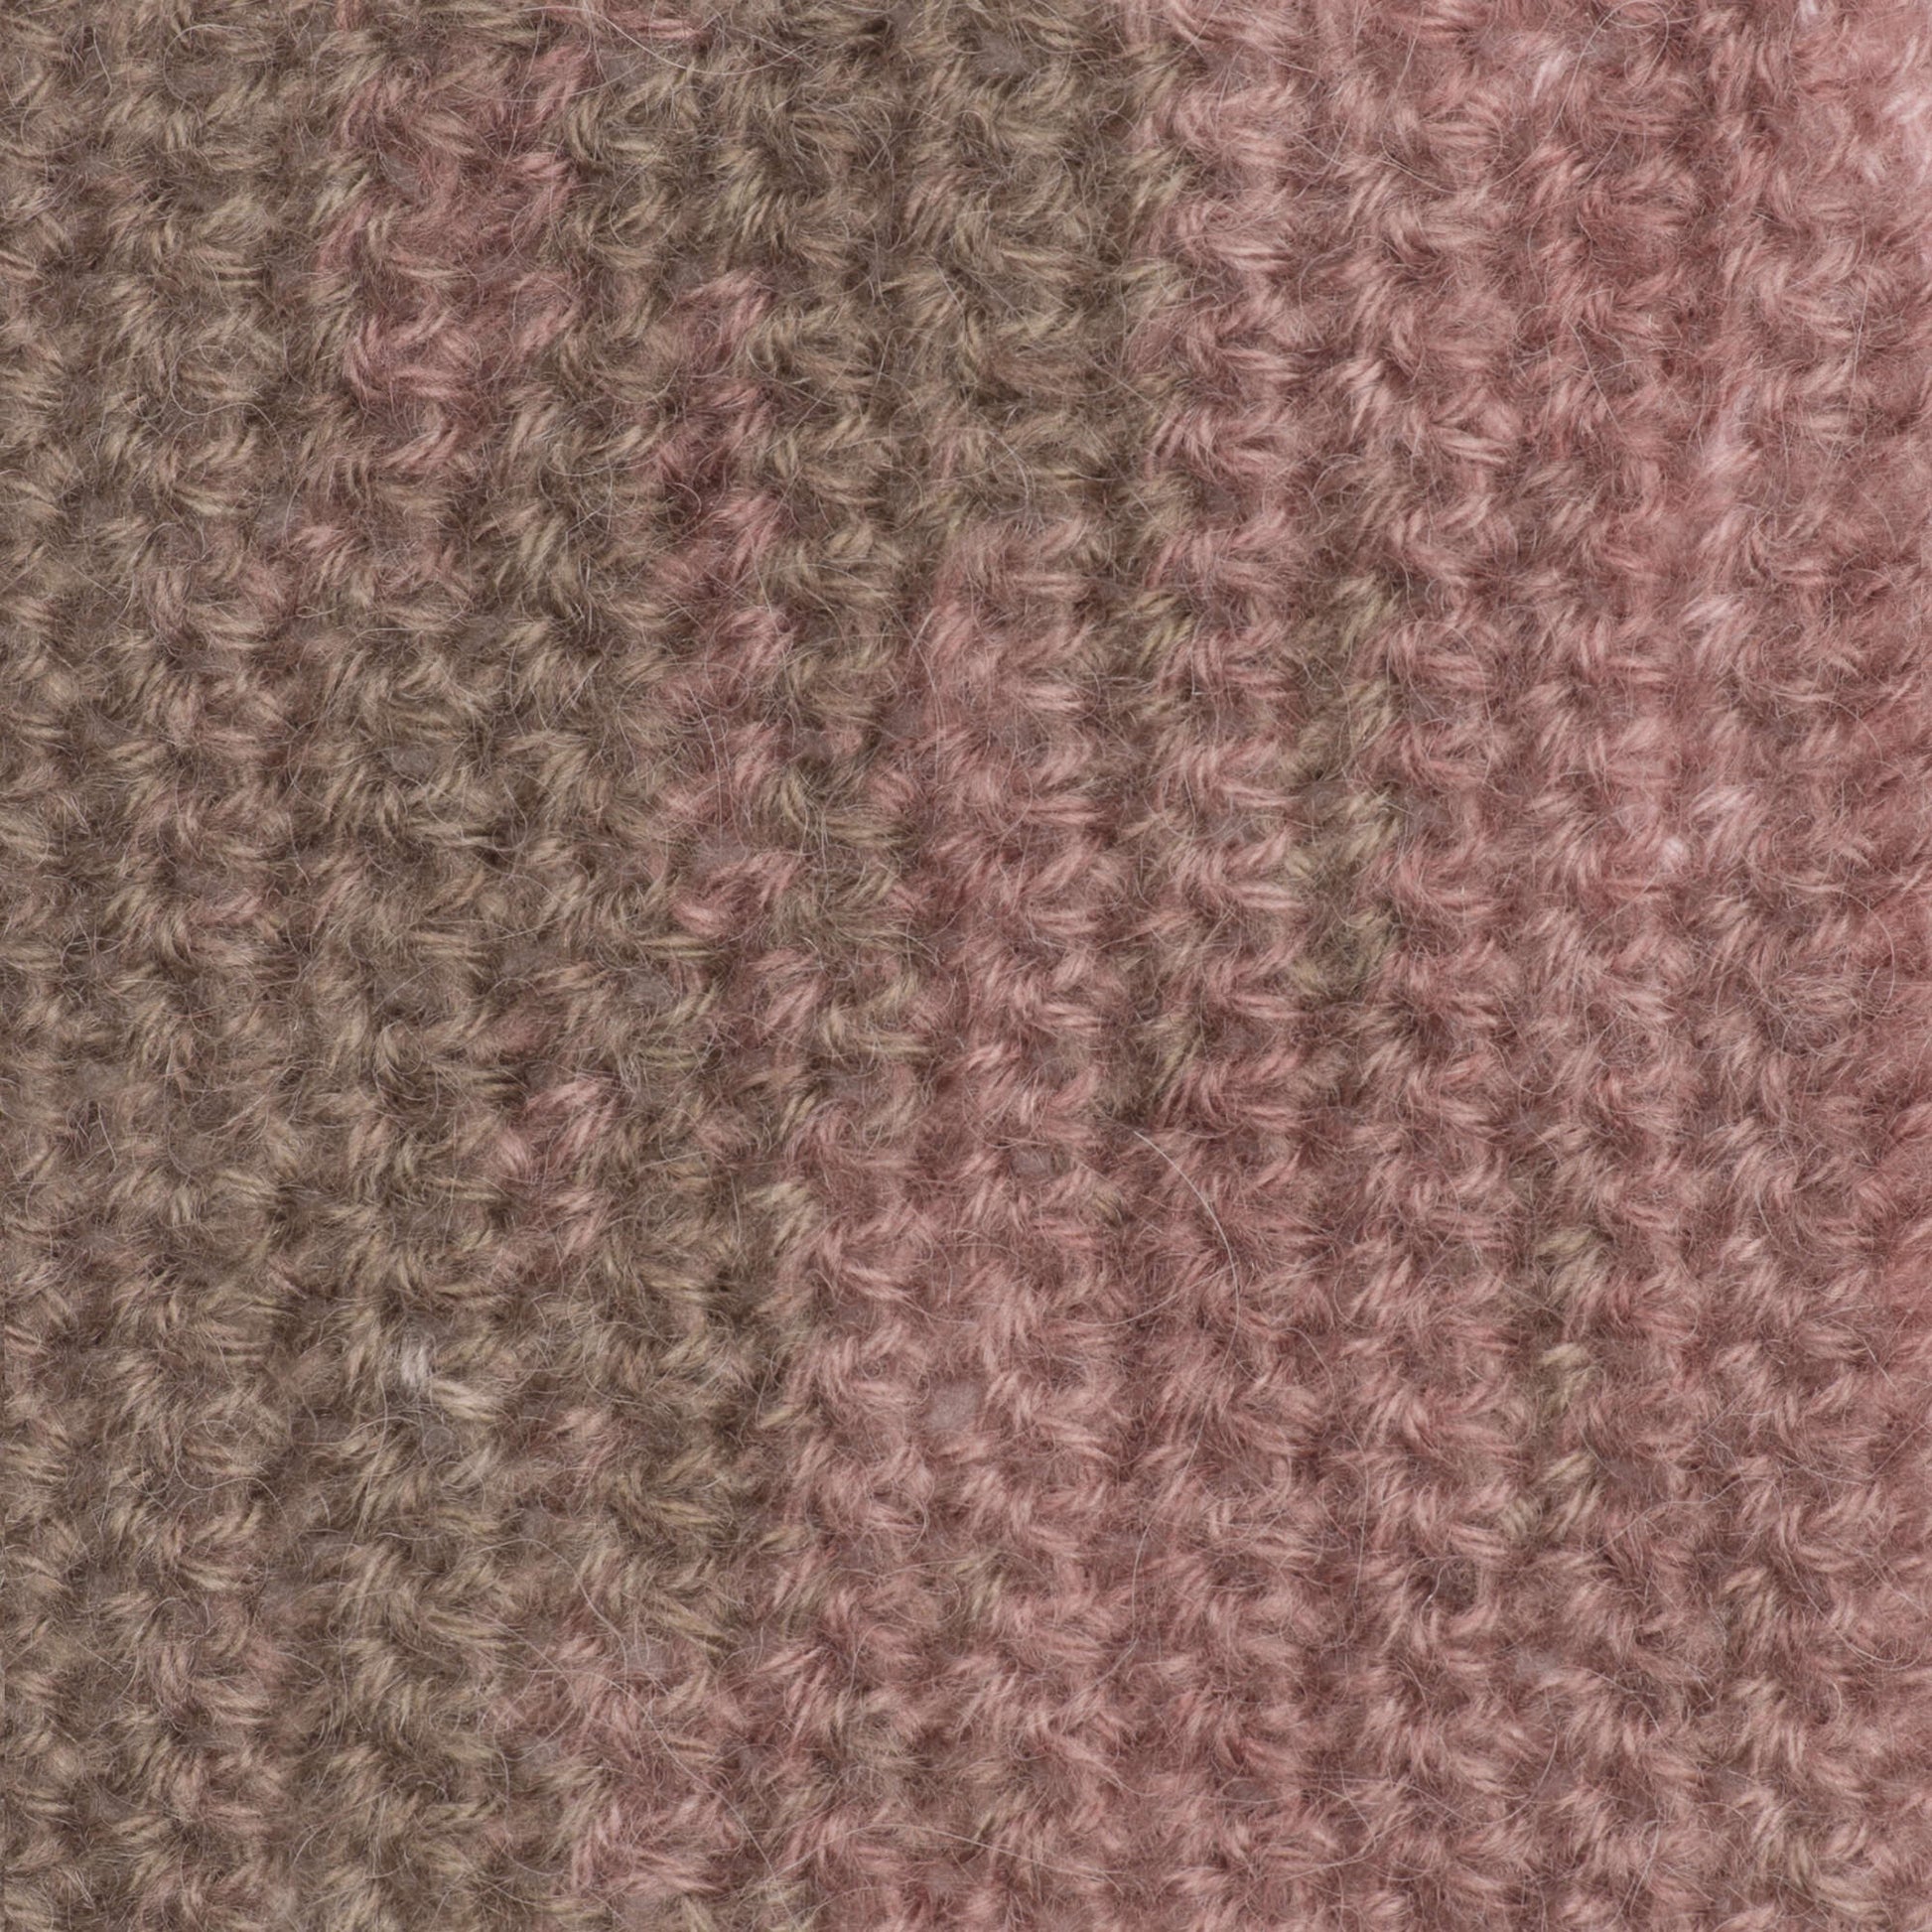 Patons Lace Yarn - Discontinued Woodrose